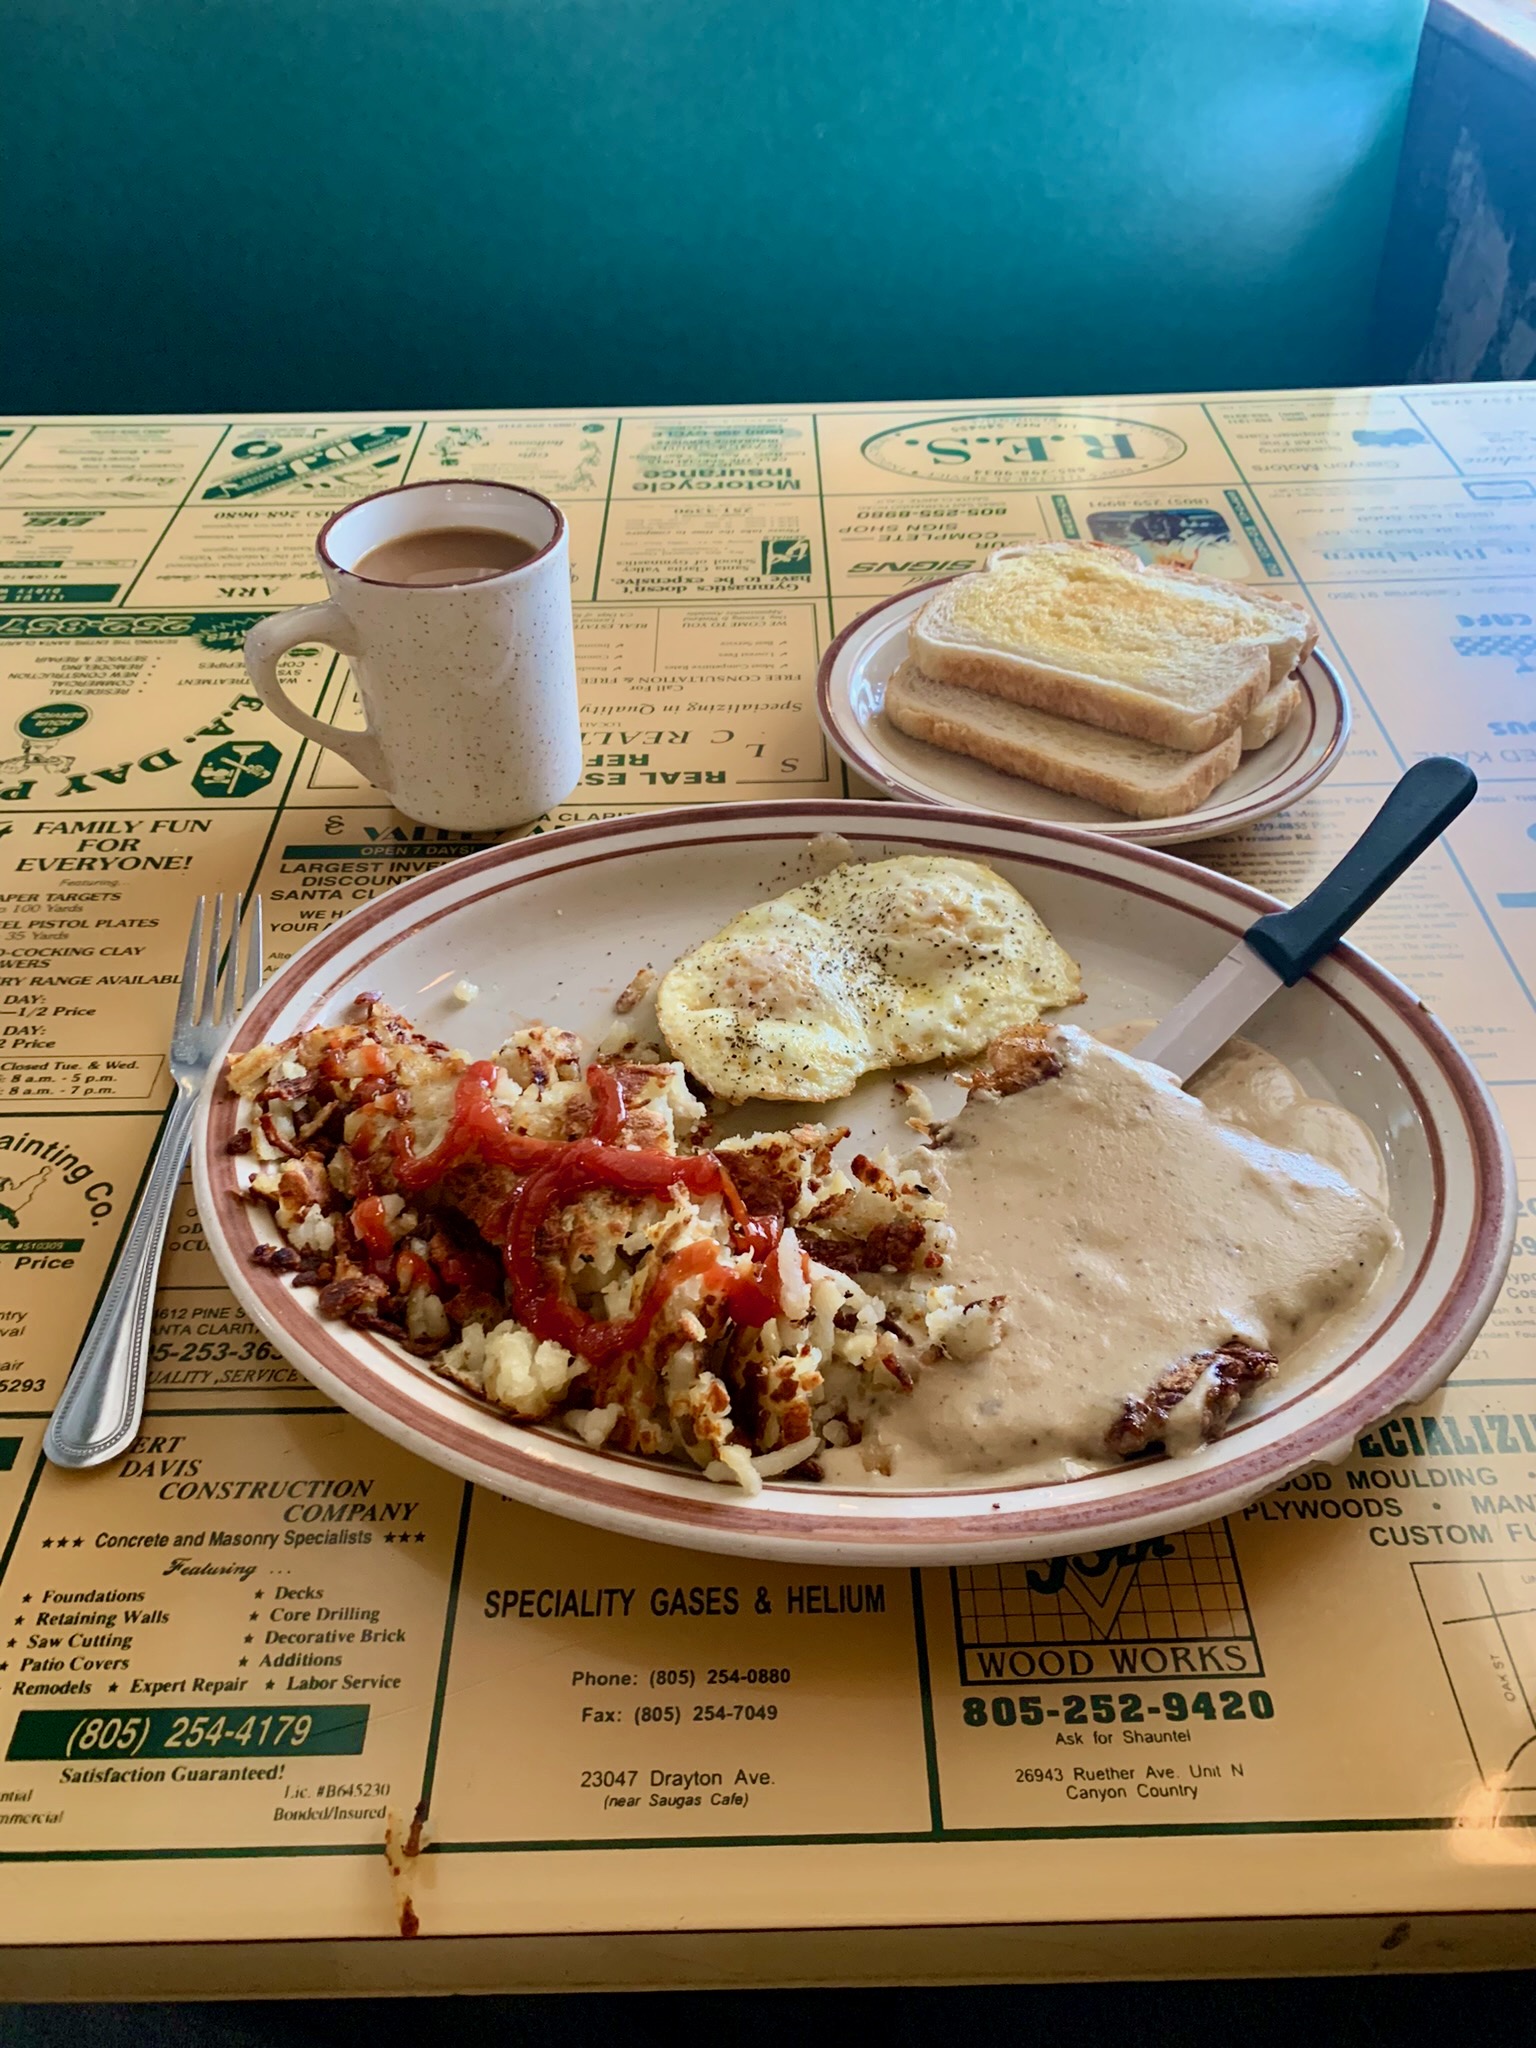 Chicken-fried steak and eggs at Saugus Cafe. Photo by Jake Hook for L.A. TACO.